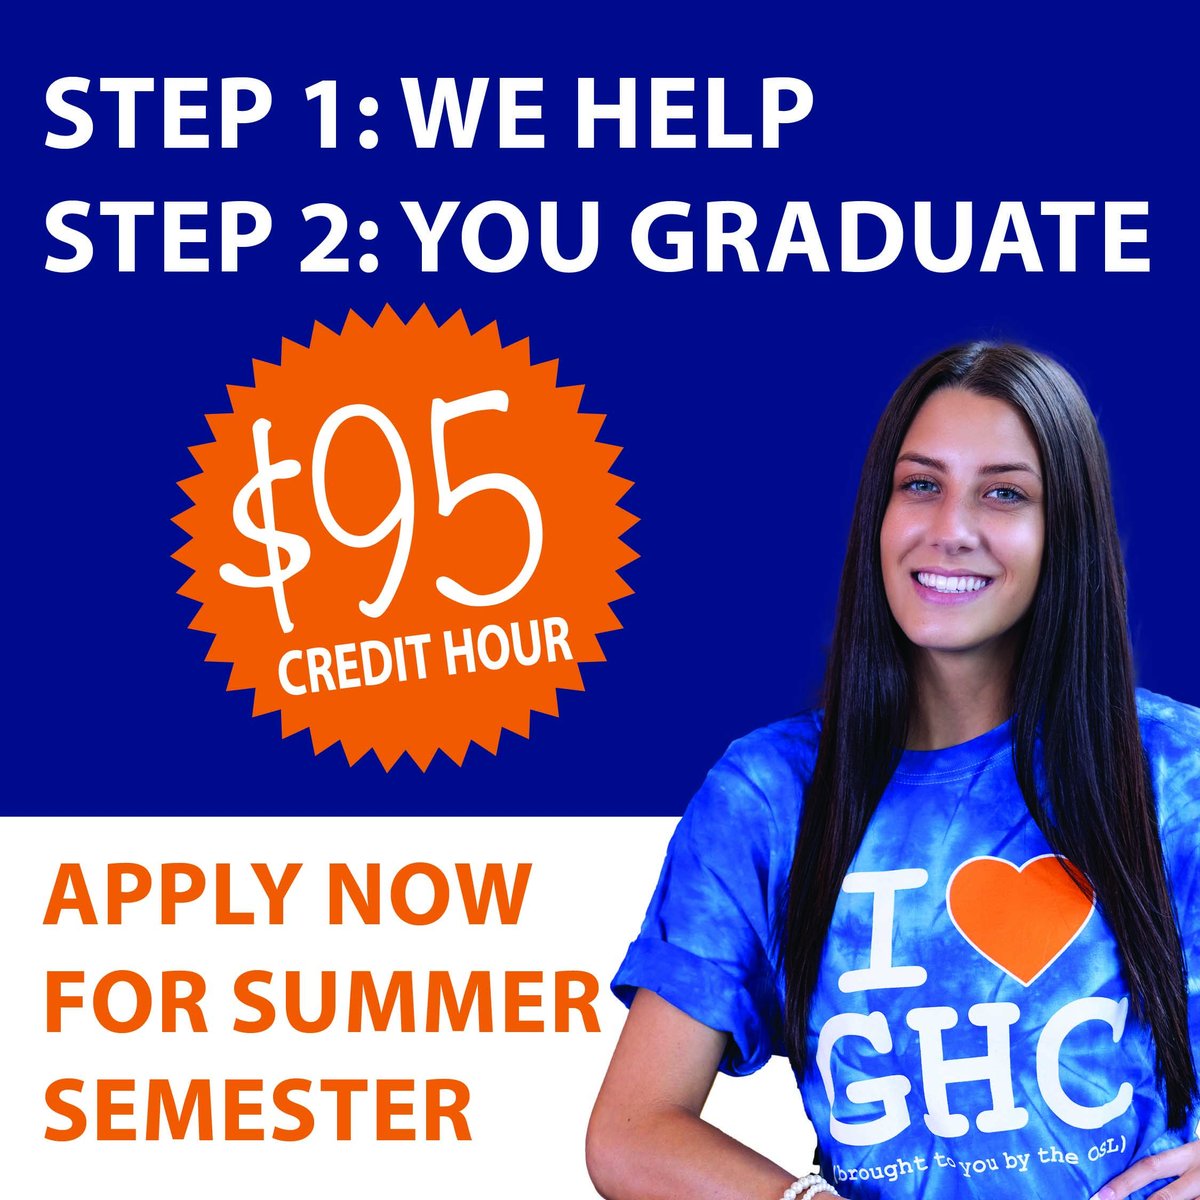 It's time to enroll in summer classes at Georgia Highlands College! Apply today at highlands.edu #BoltUp